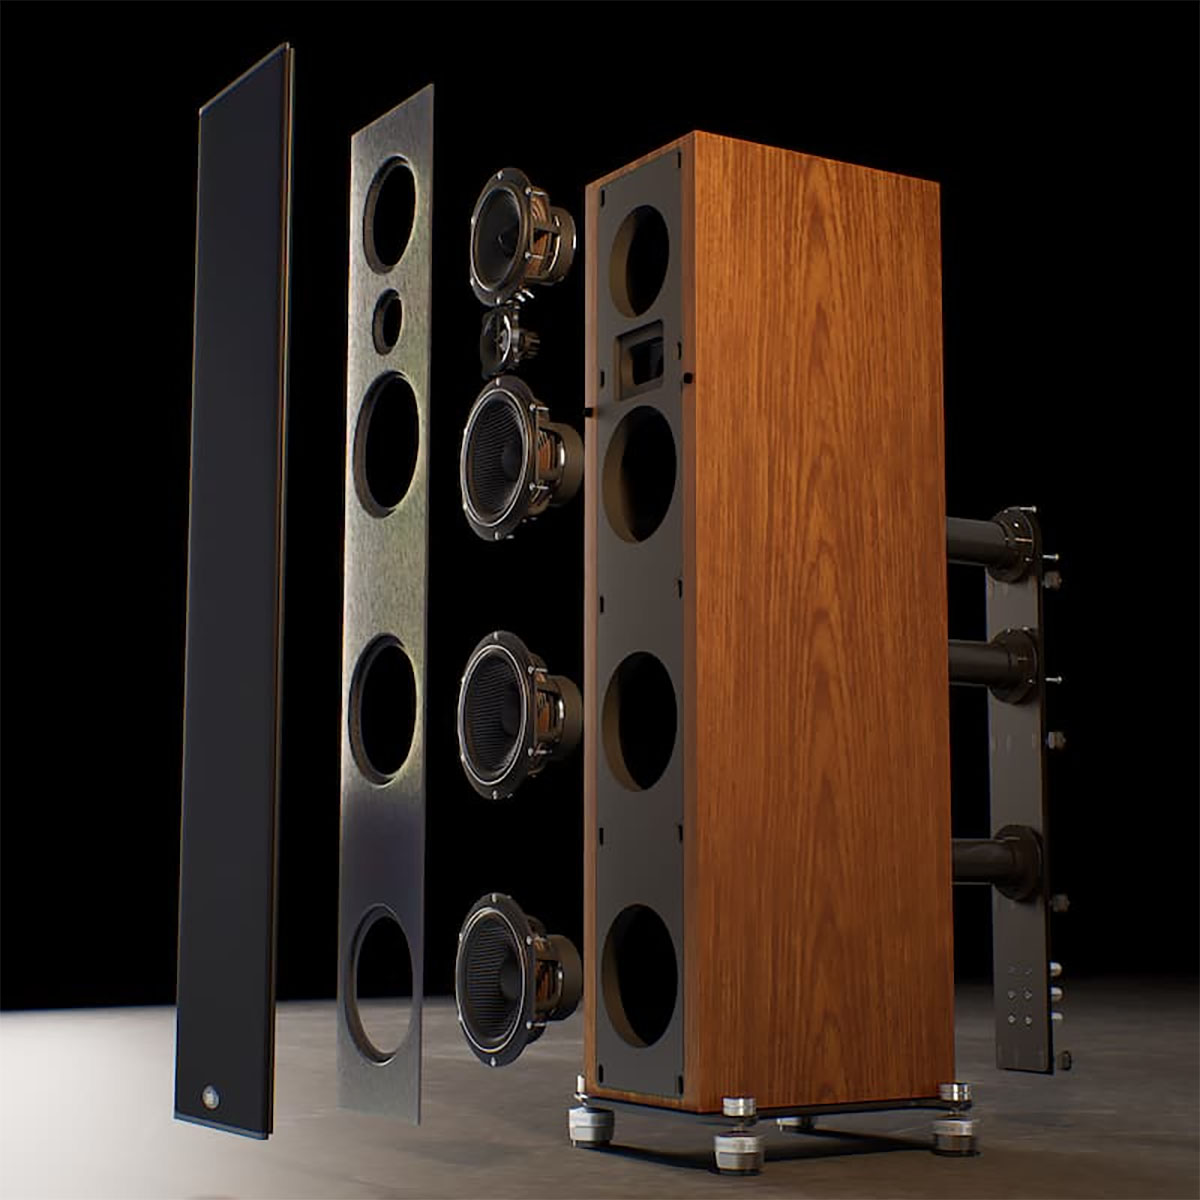 Dissected view of PSB Synchrony T600 floor standing speaker